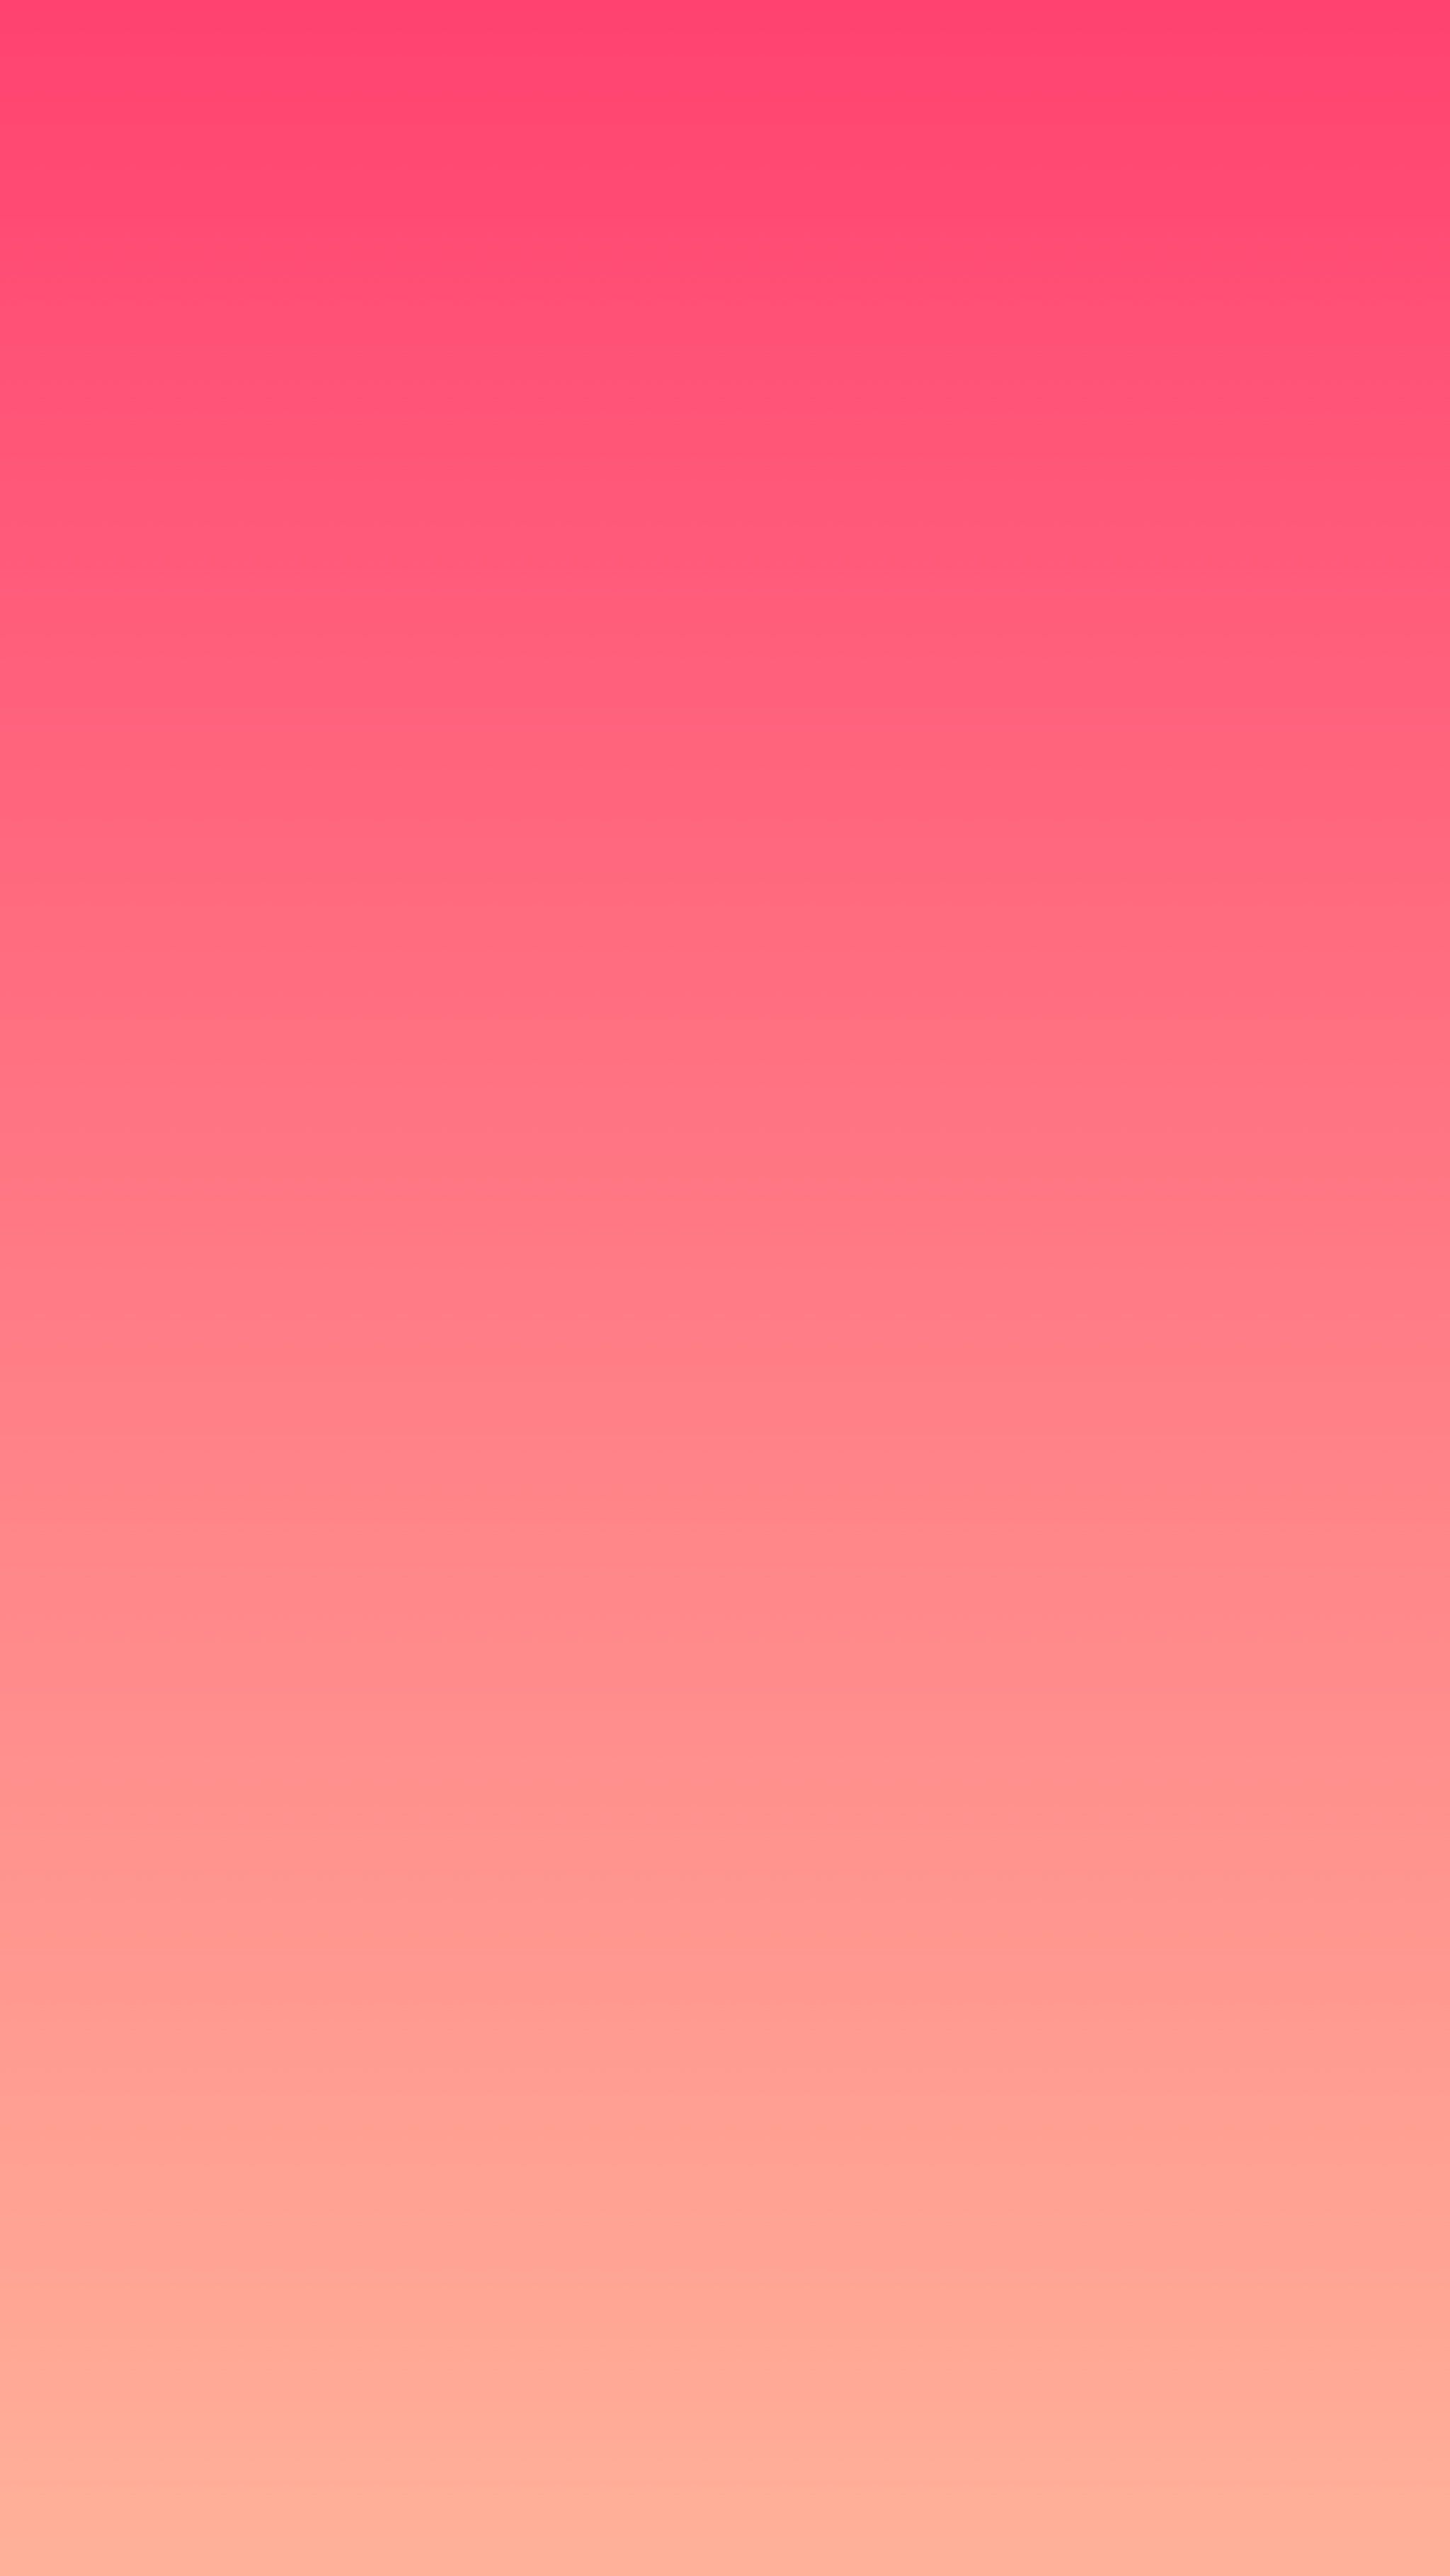 Peachy Pink - Coral Color , HD Wallpaper & Backgrounds